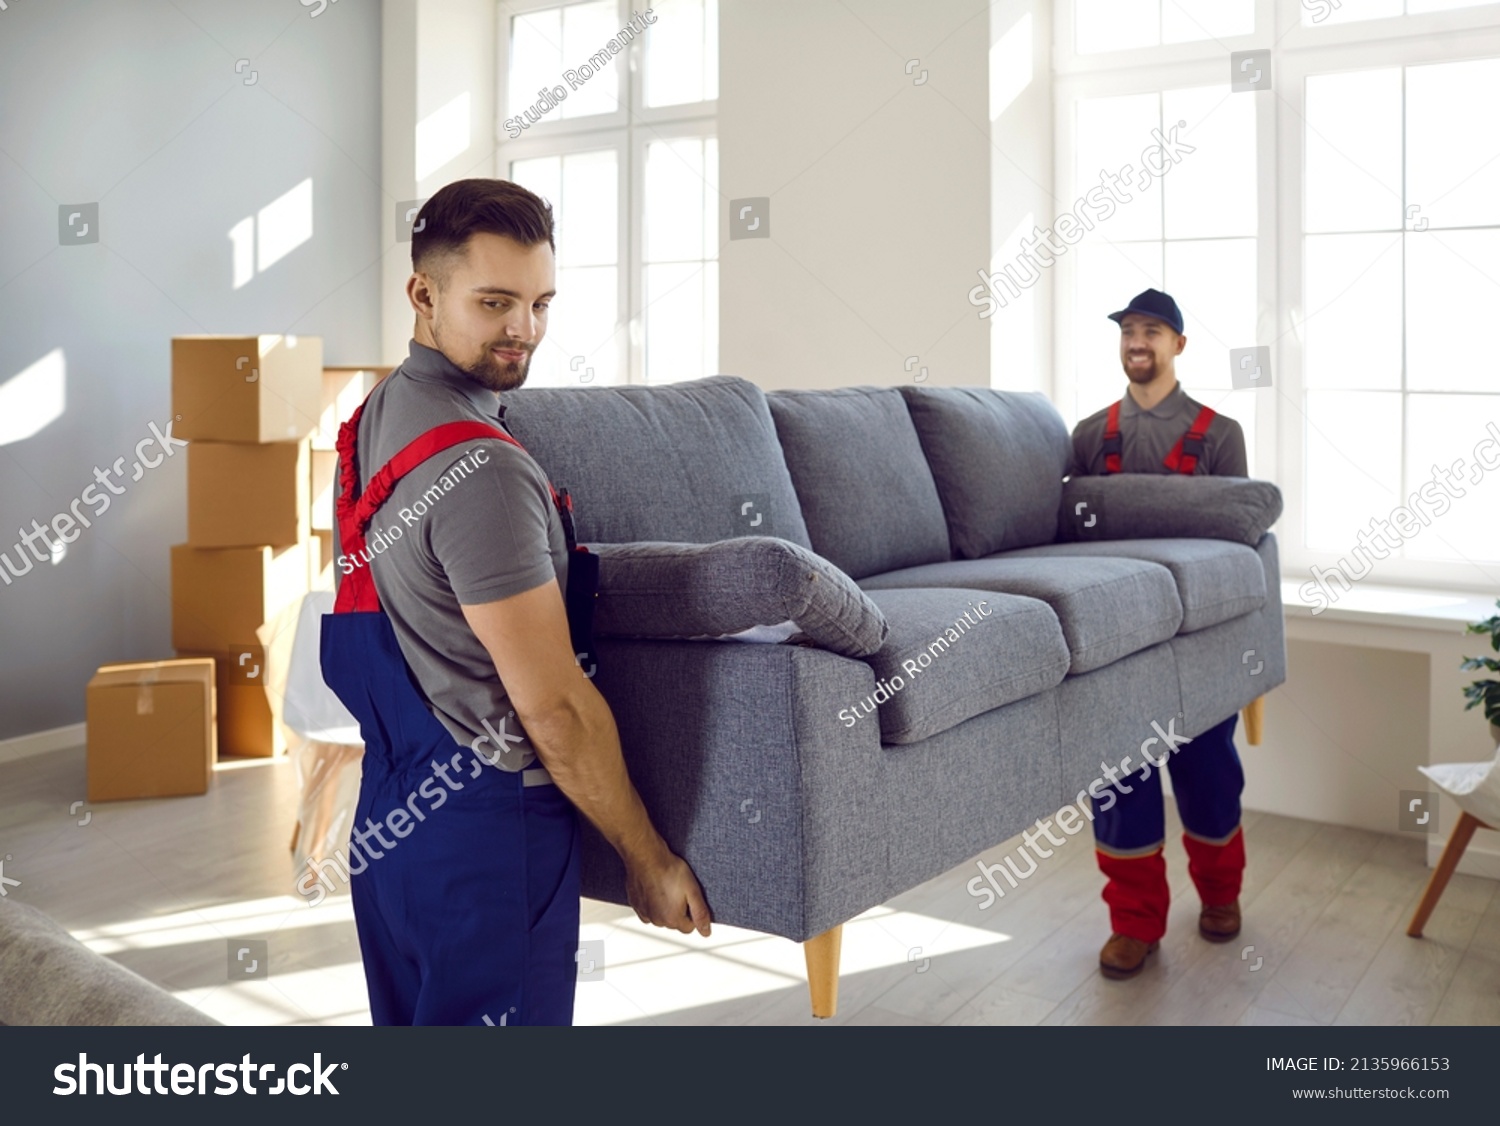 Two professional relocation service workers in overalls move sofa in customer's apartment. Movers carry sofa, cardboard boxes and assembling furniture. Moving and delivery company services. #2135966153